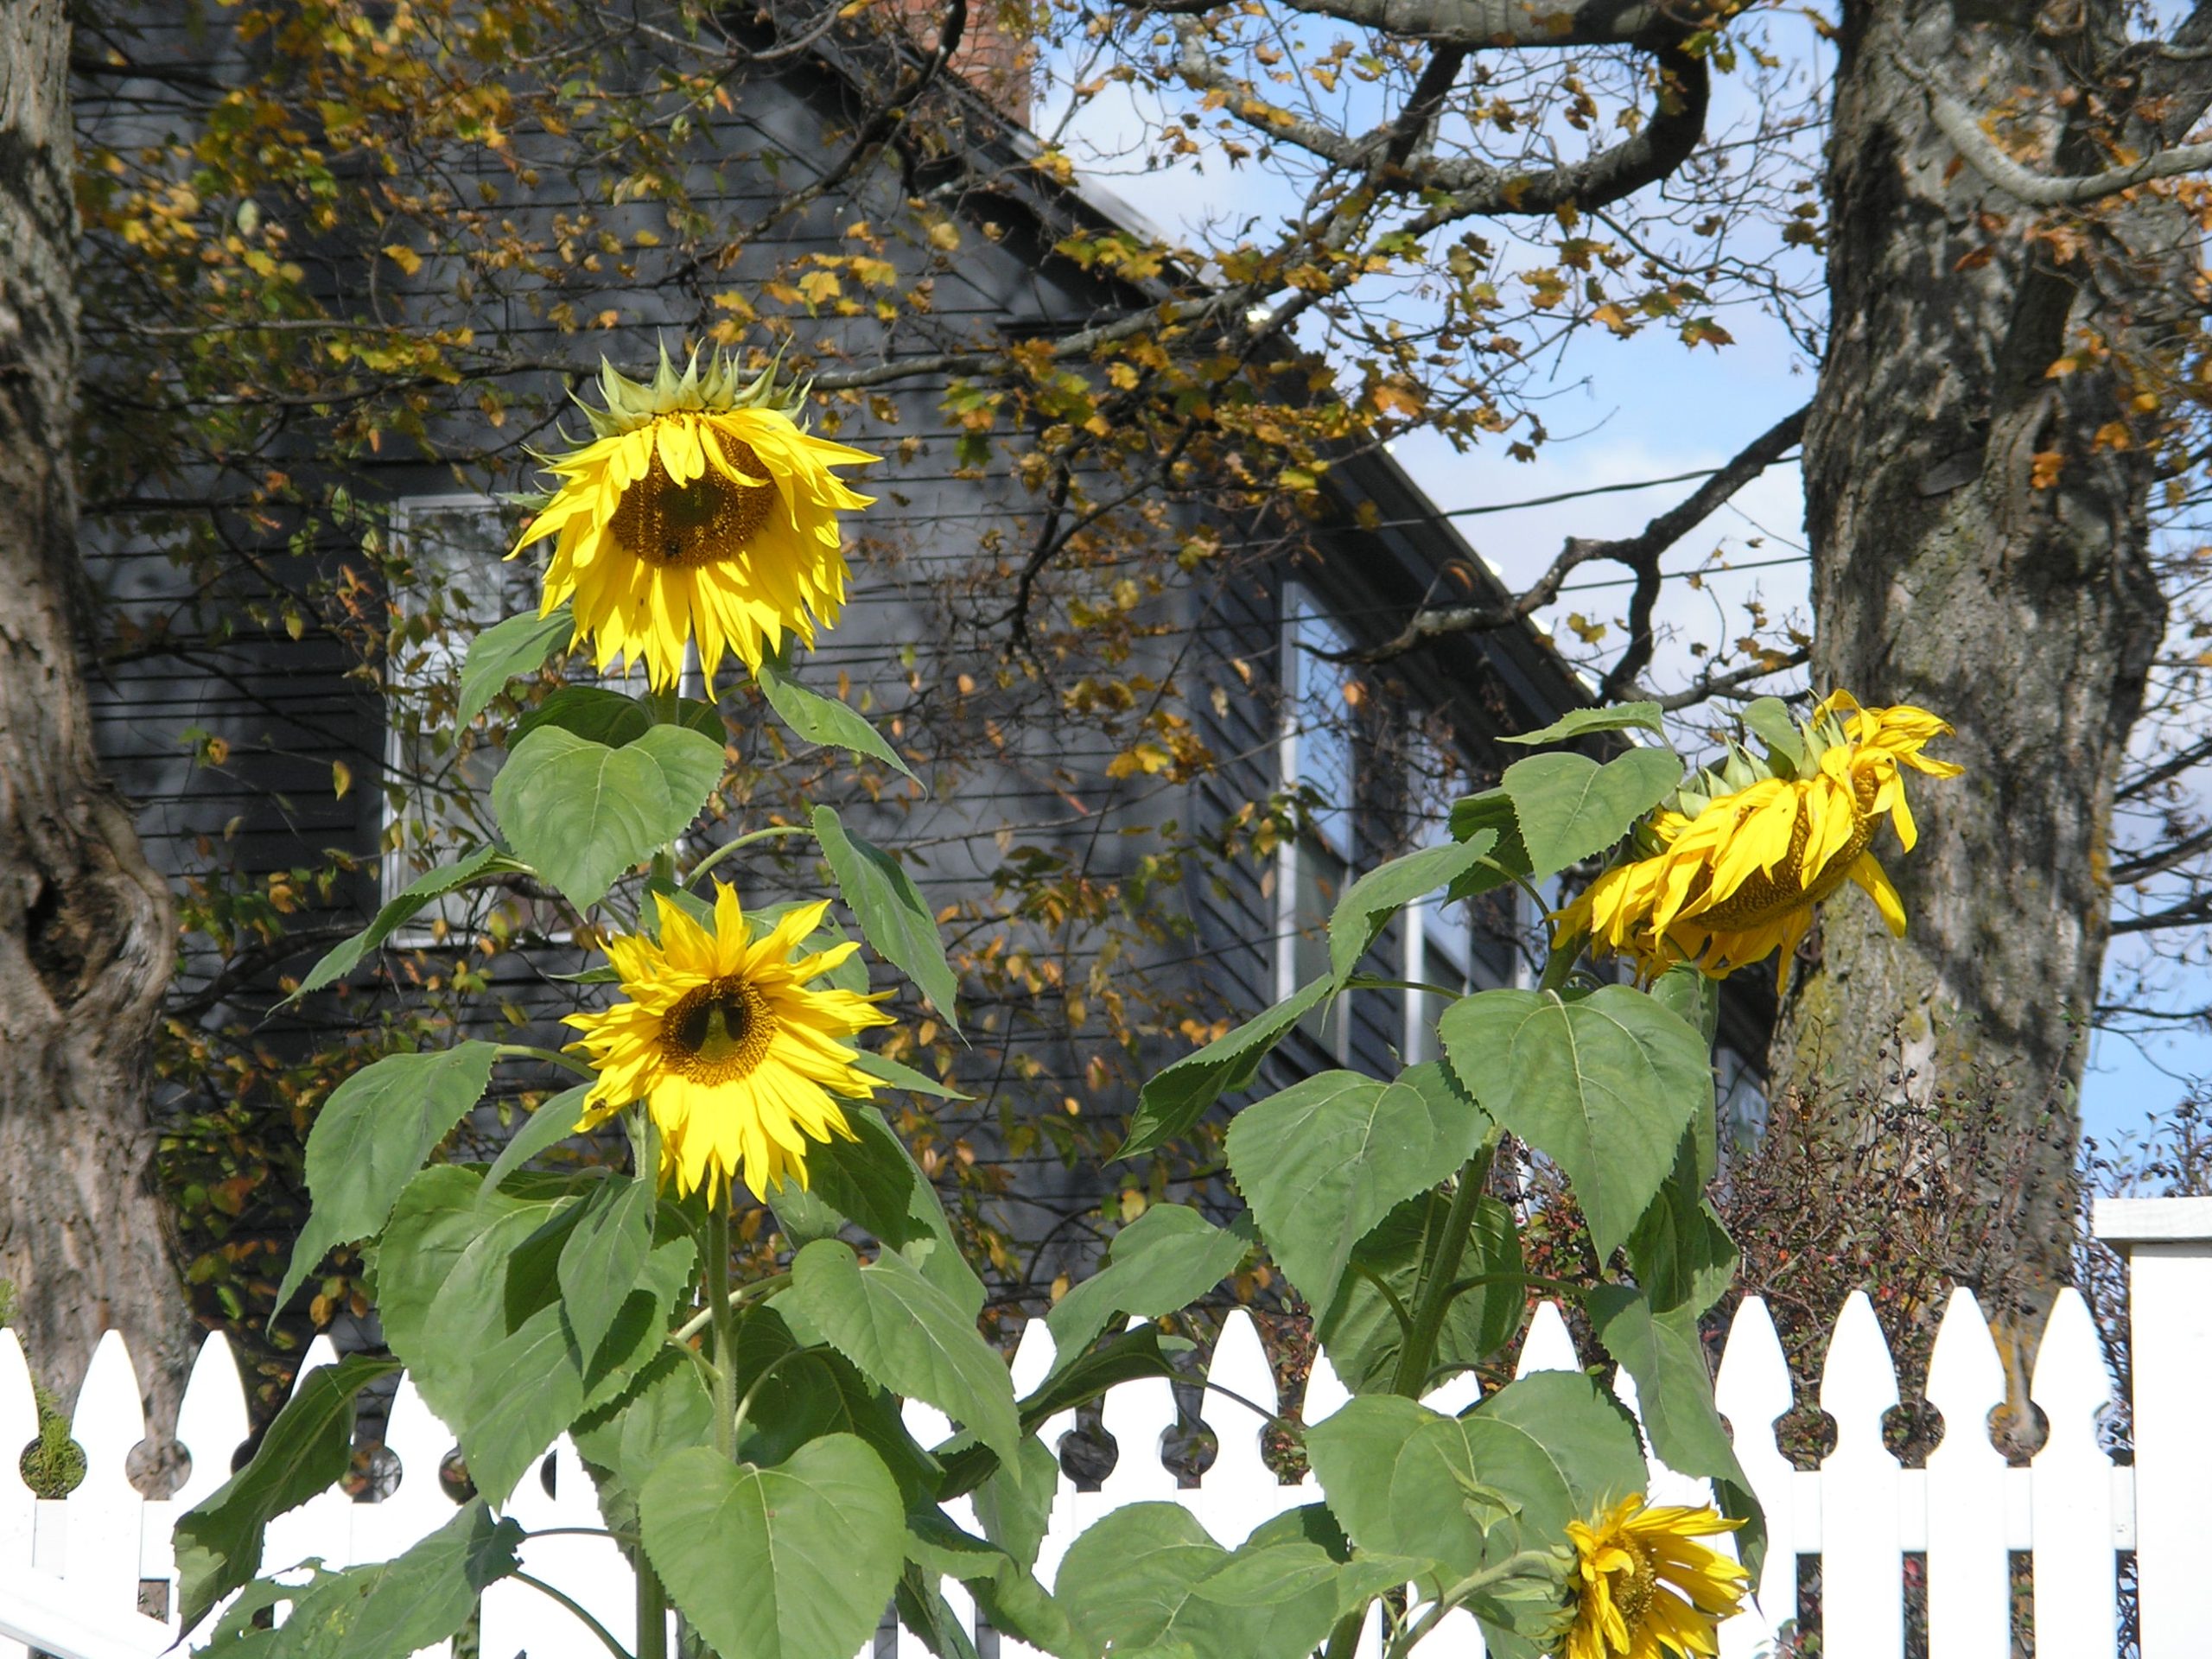 Sunflowers in Autumn (user submitted)